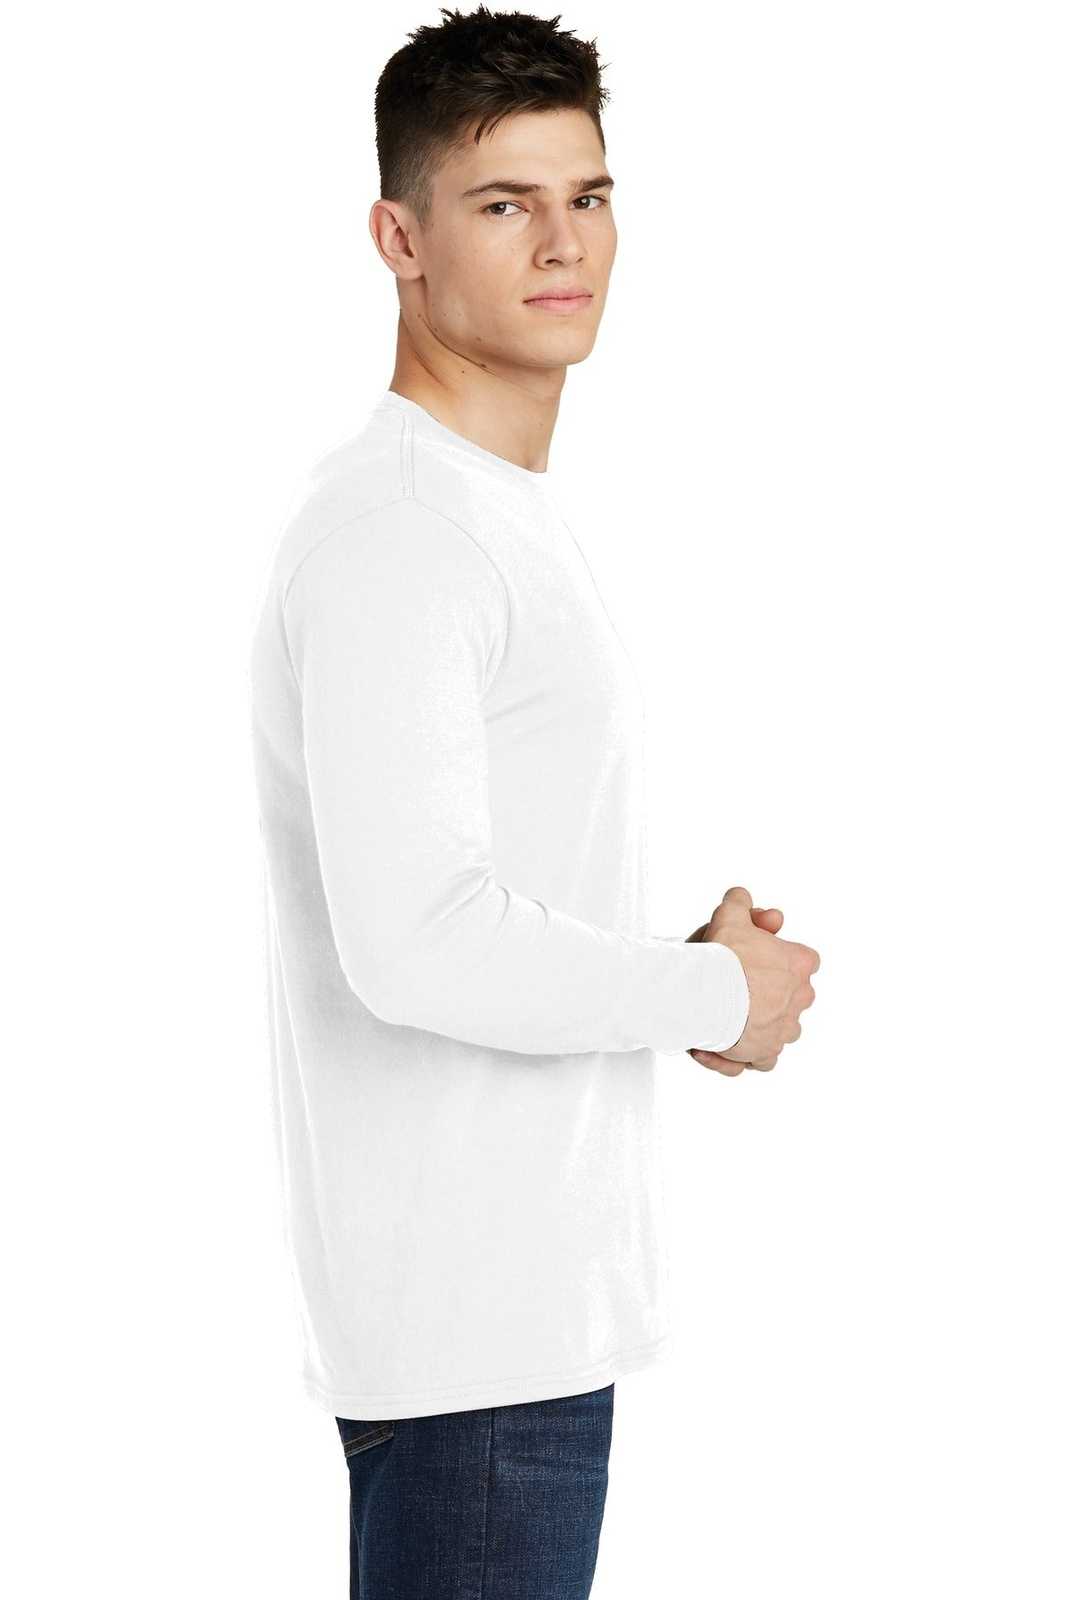 District DT6200 Very Important Tee Long Sleeve - White - HIT a Double - 3